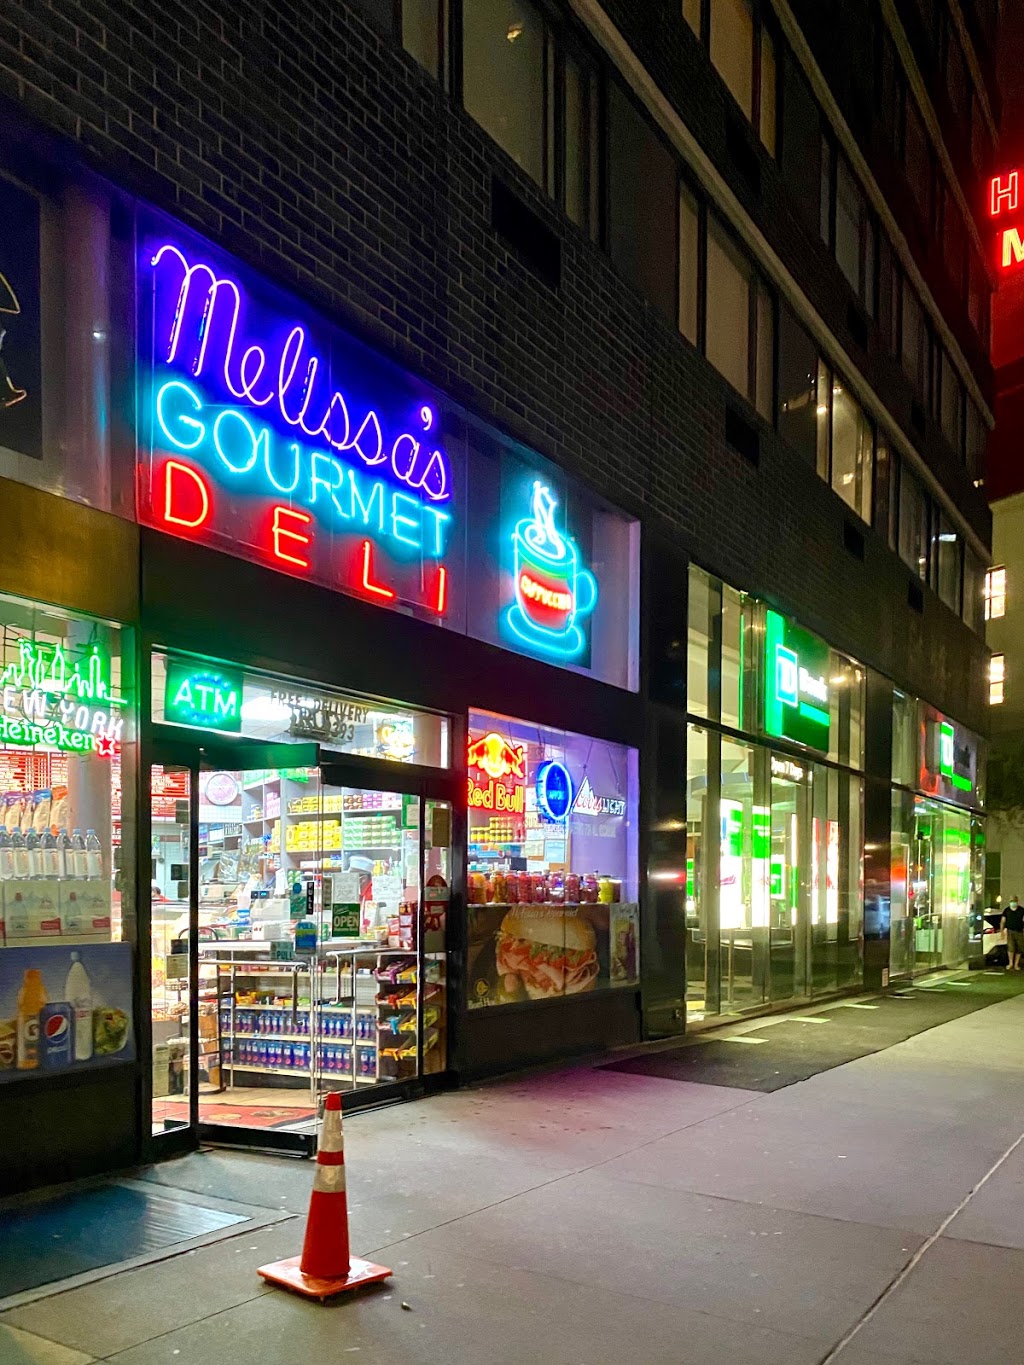 Melissas Gourmet | meal delivery | 62 W 62nd St, New York, NY 10023, USA | 2122659393 OR +1 212-265-9393